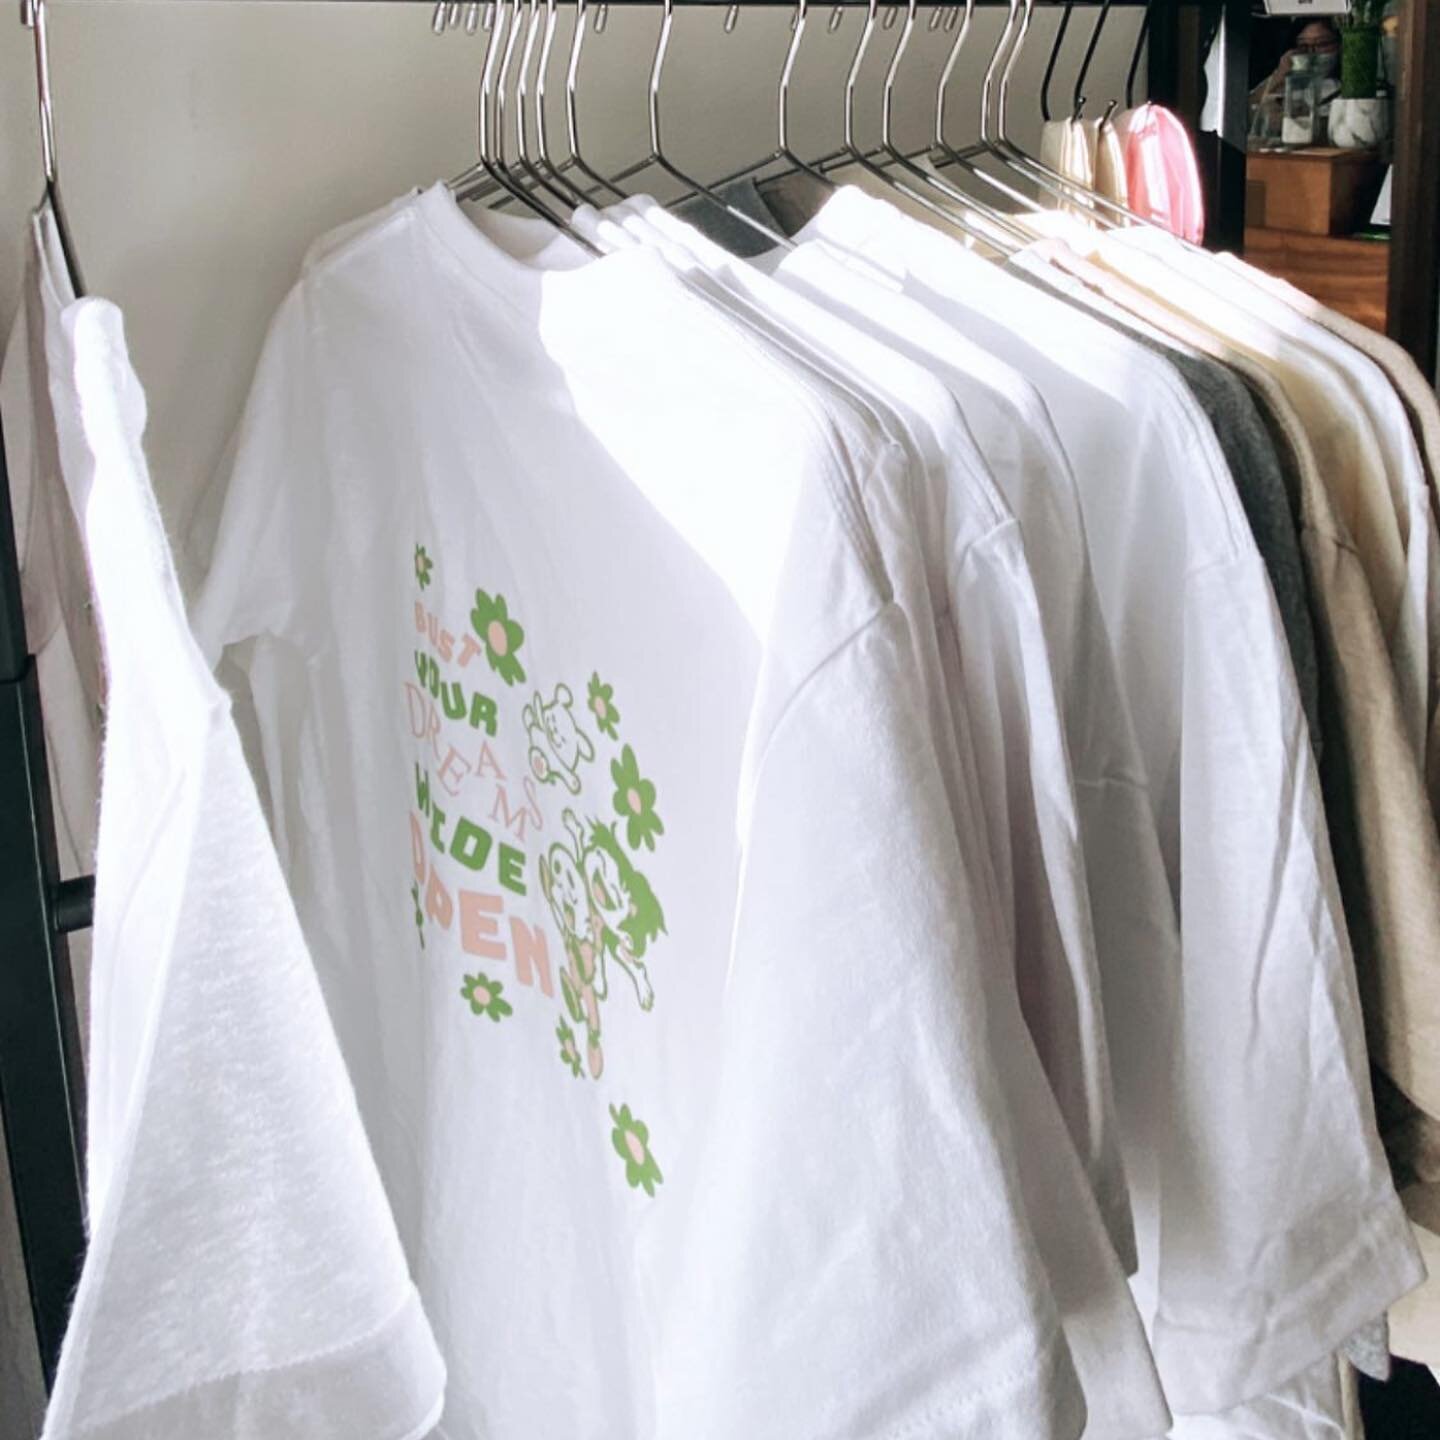 YALL 🥲 ITS ALL HAPPENING!! Our @chunkypaper collab t shirt just landed !! Grab yours in person at their Chinatown shop or online, link in bio